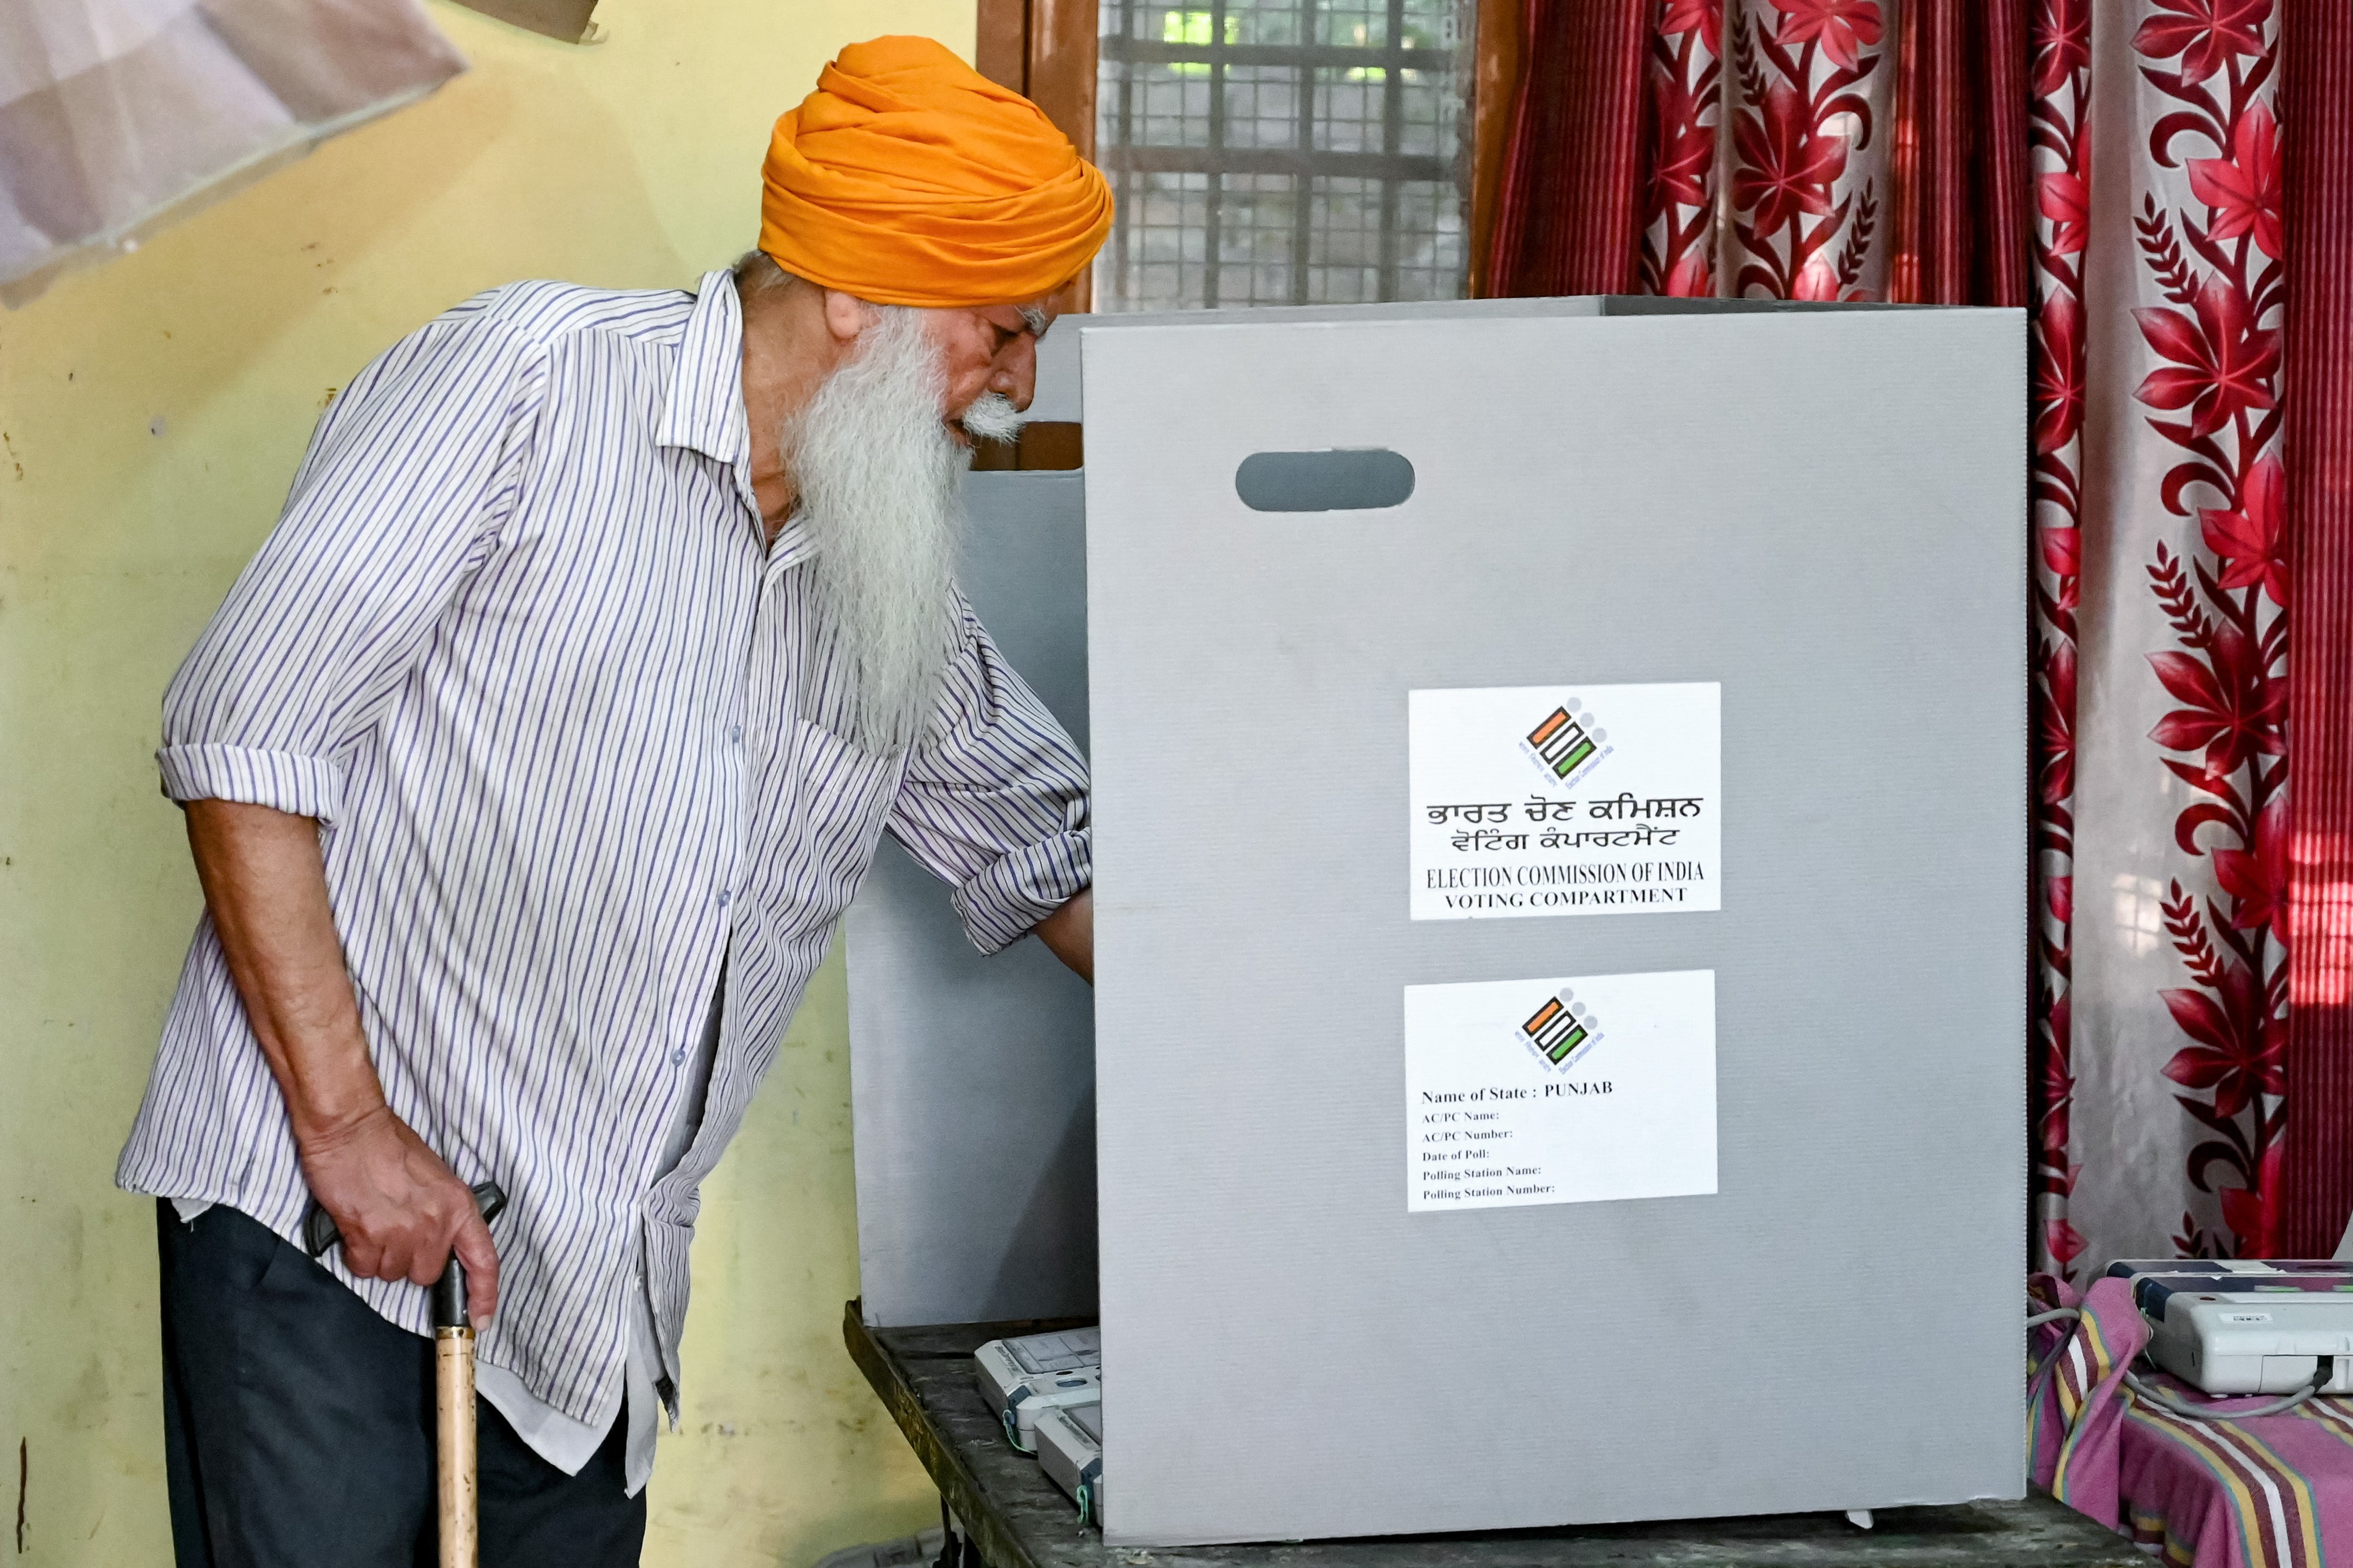 A man casts his ballot to vote at a polling station in Amritsar on 1 June 2024, during the seventh and final phase of voting in India’s general election